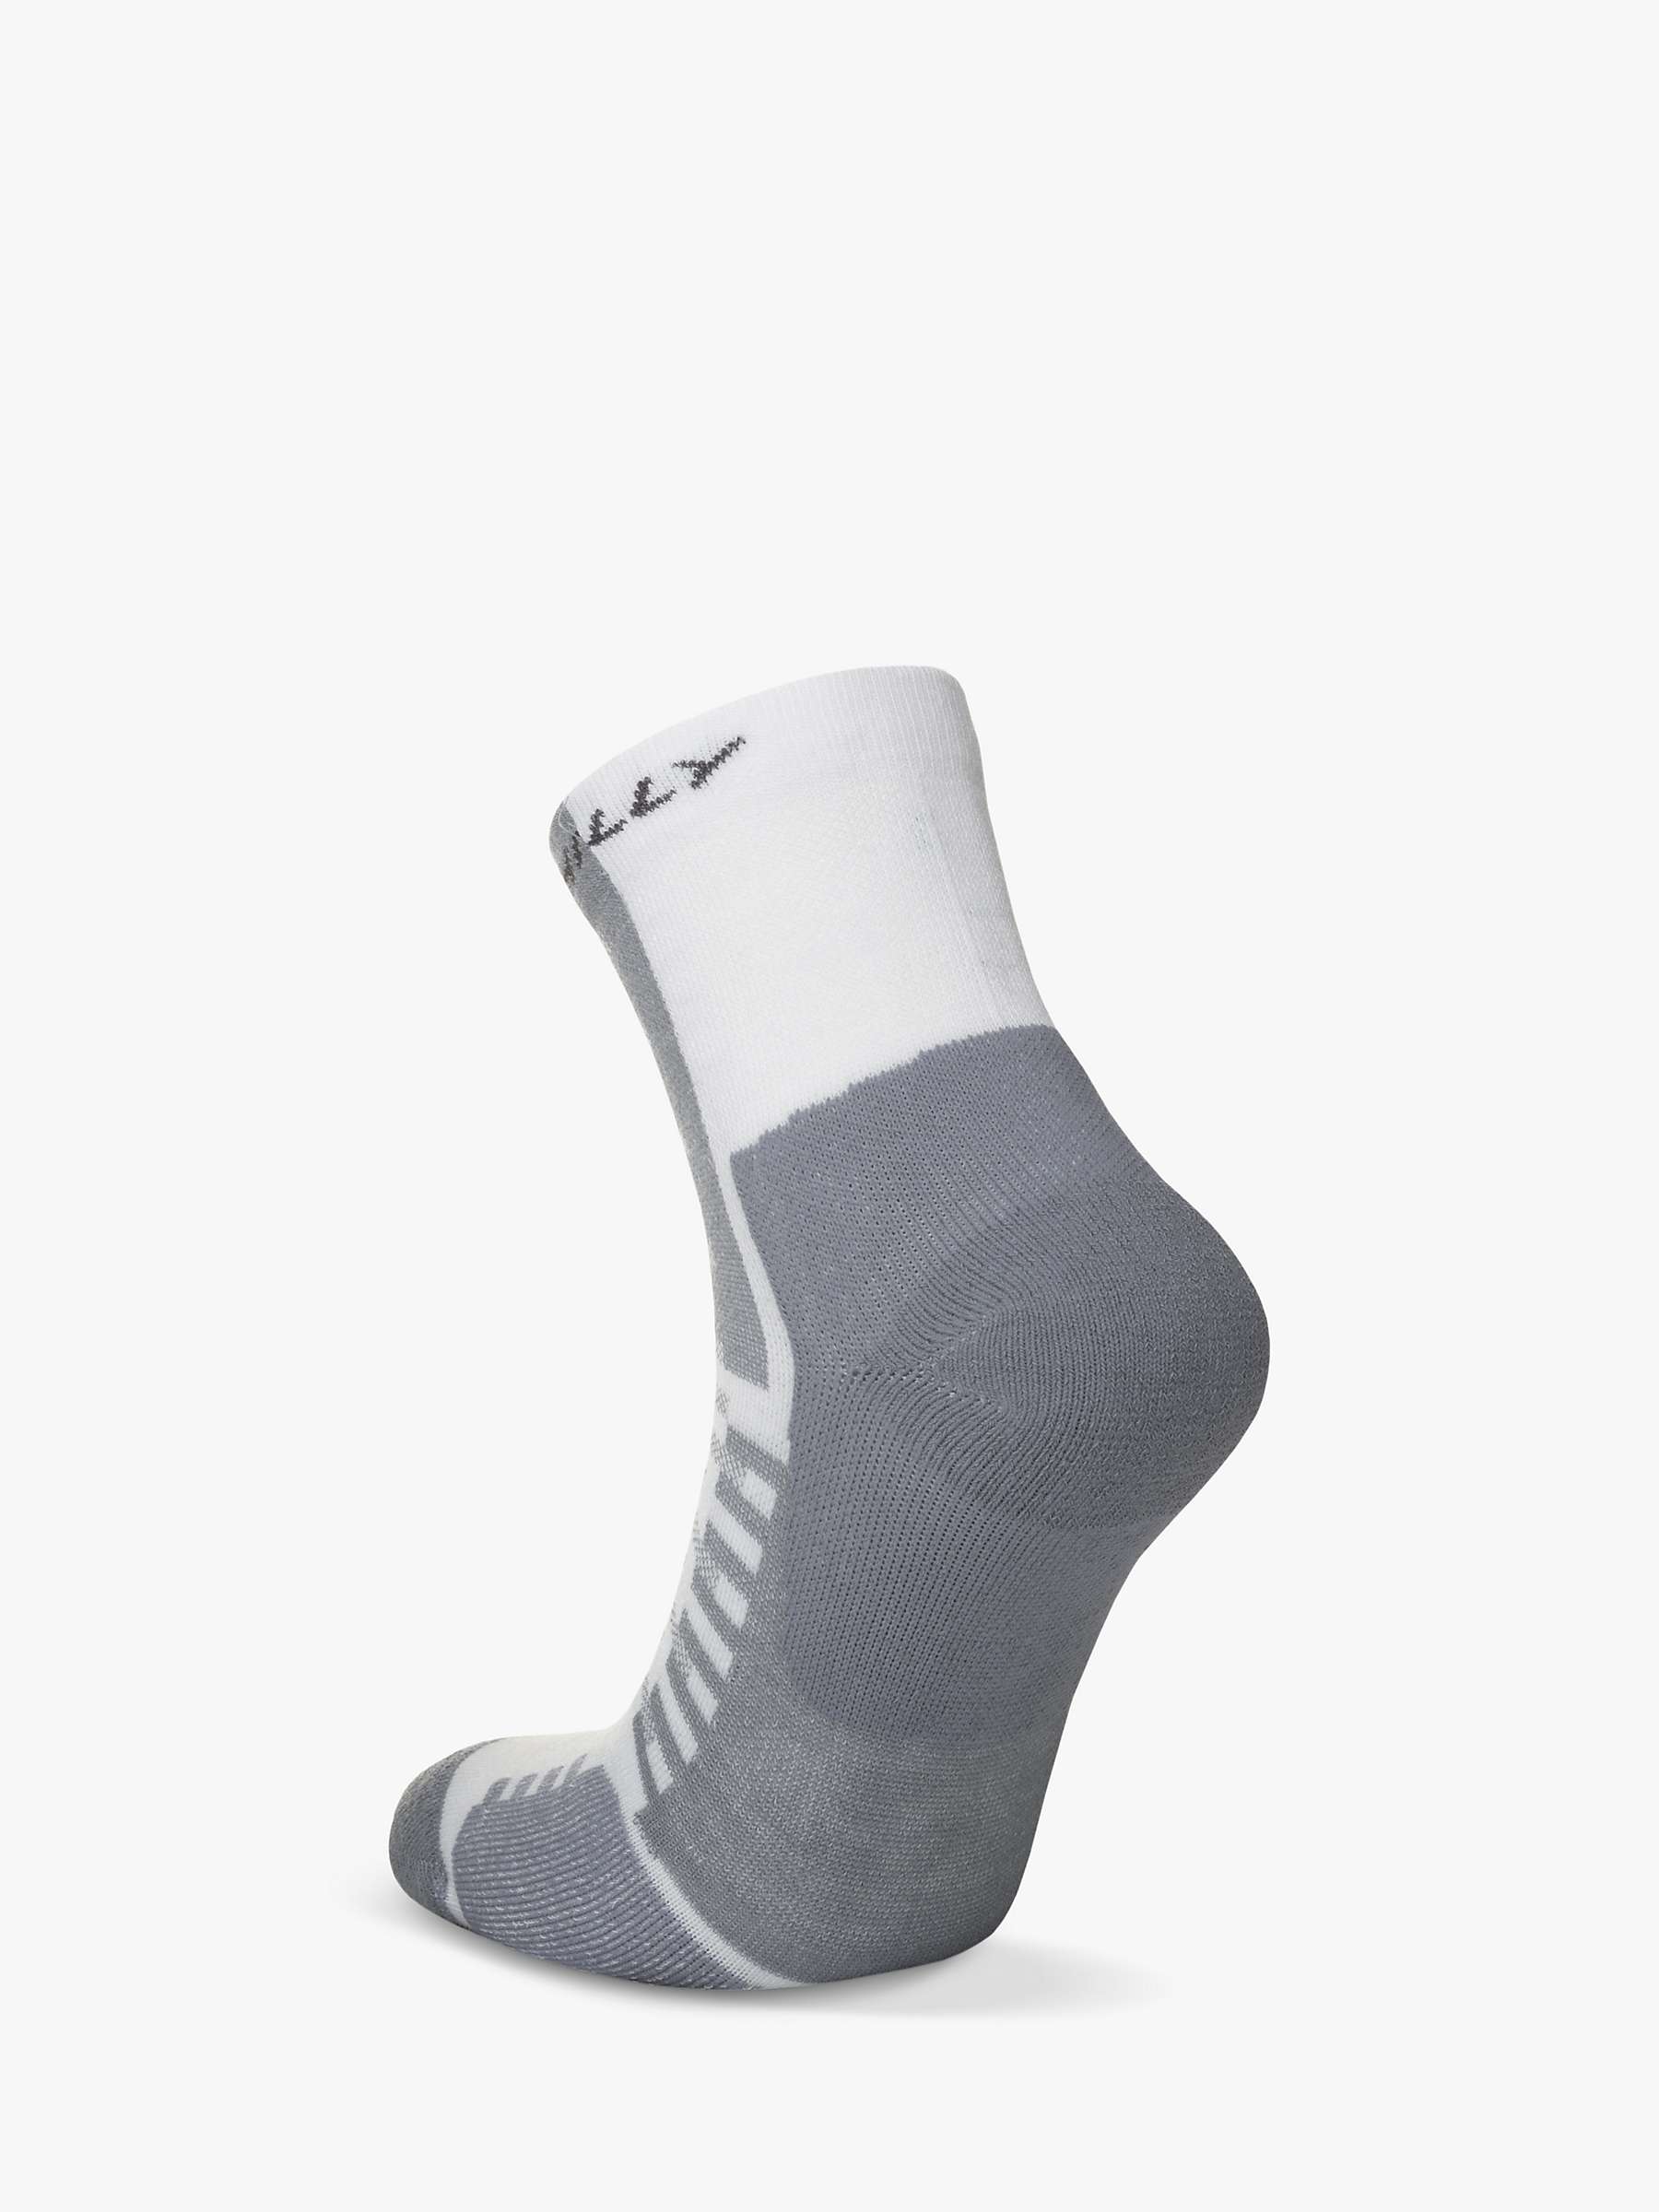 Hilly Active Ankle Running Socks at John Lewis & Partners